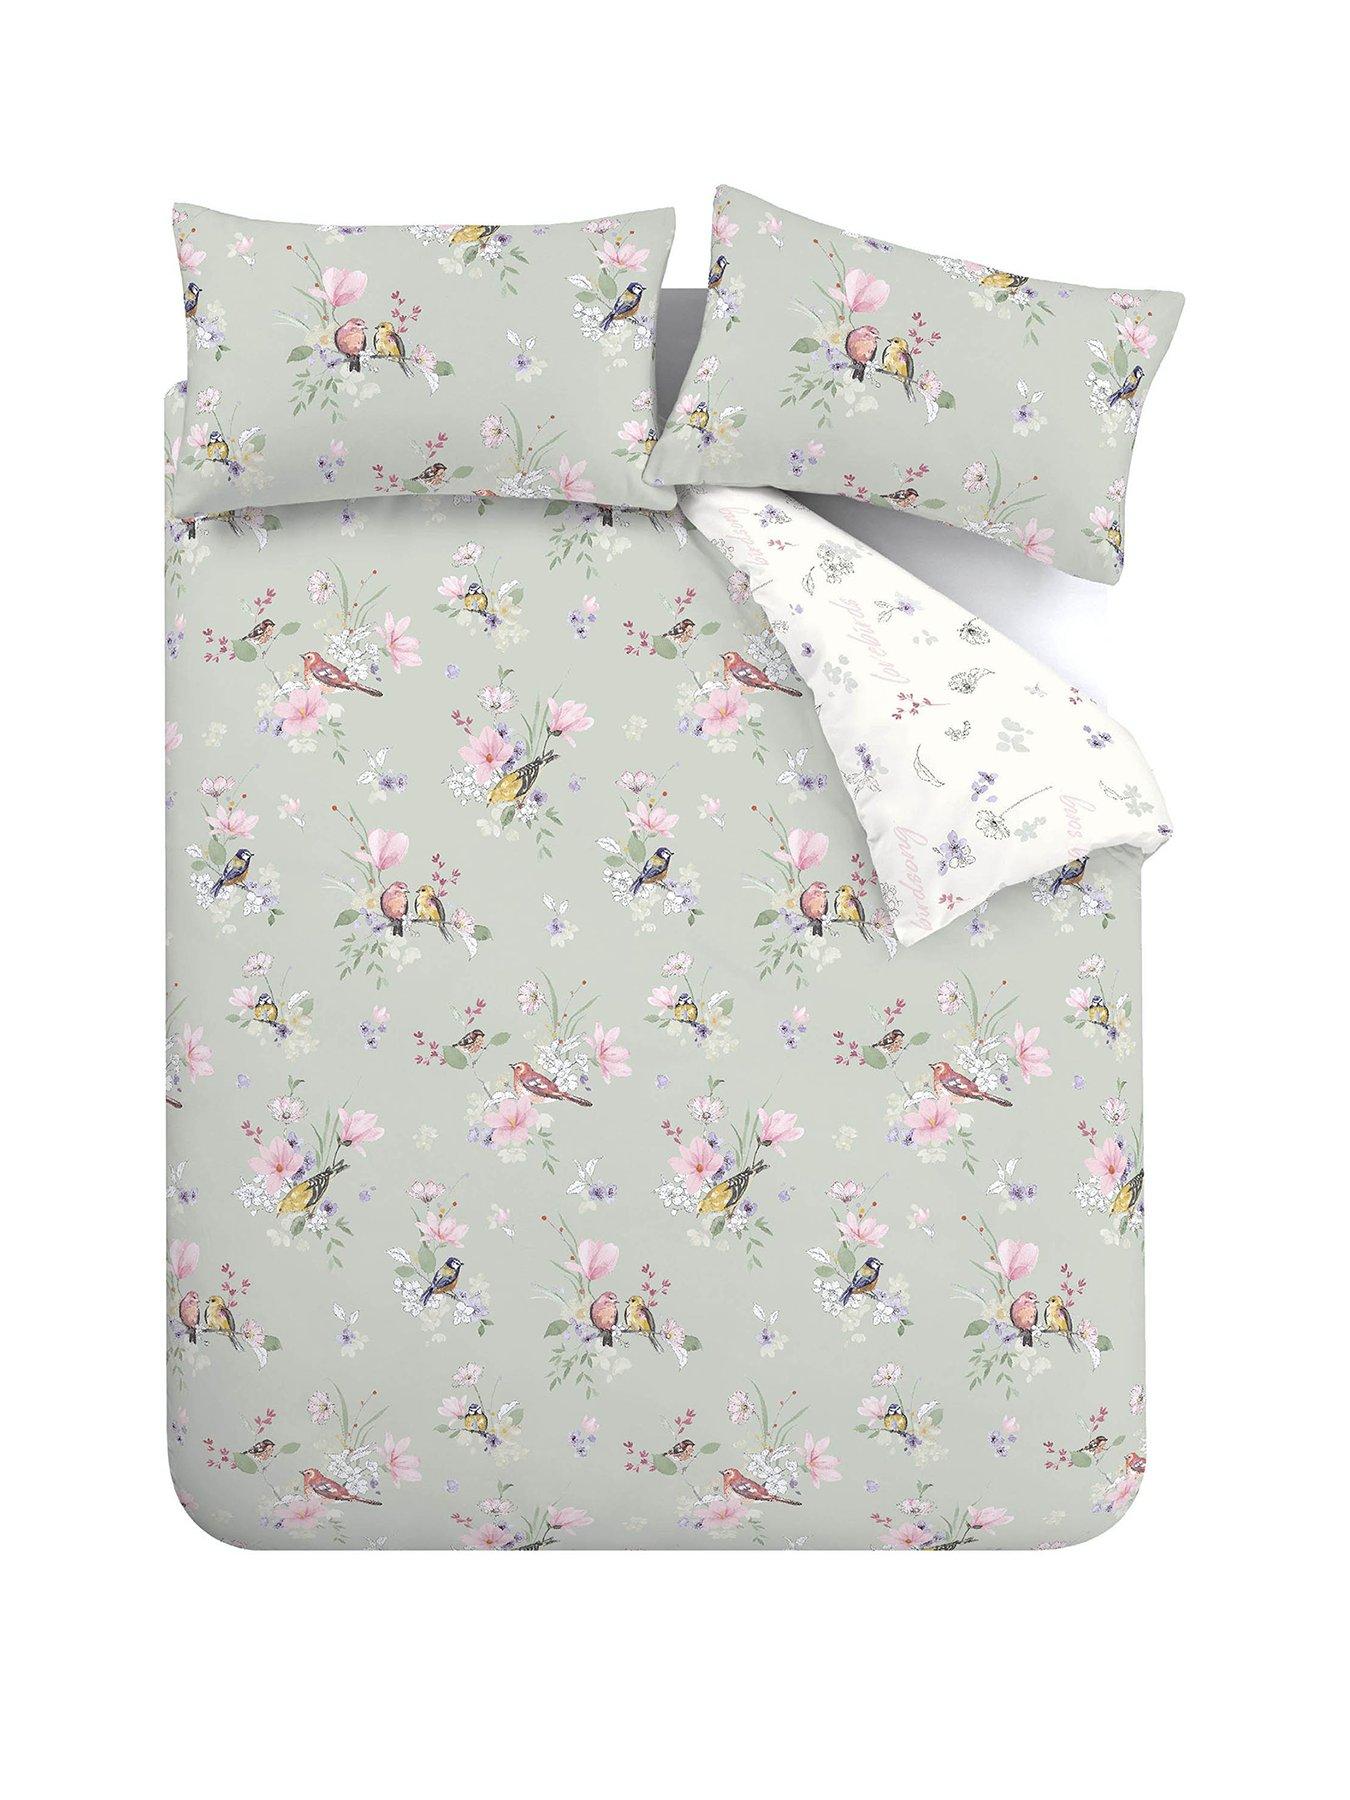 Catherine Lansfield Green Meadowsweet Floral Reversible Duvet Cover Set